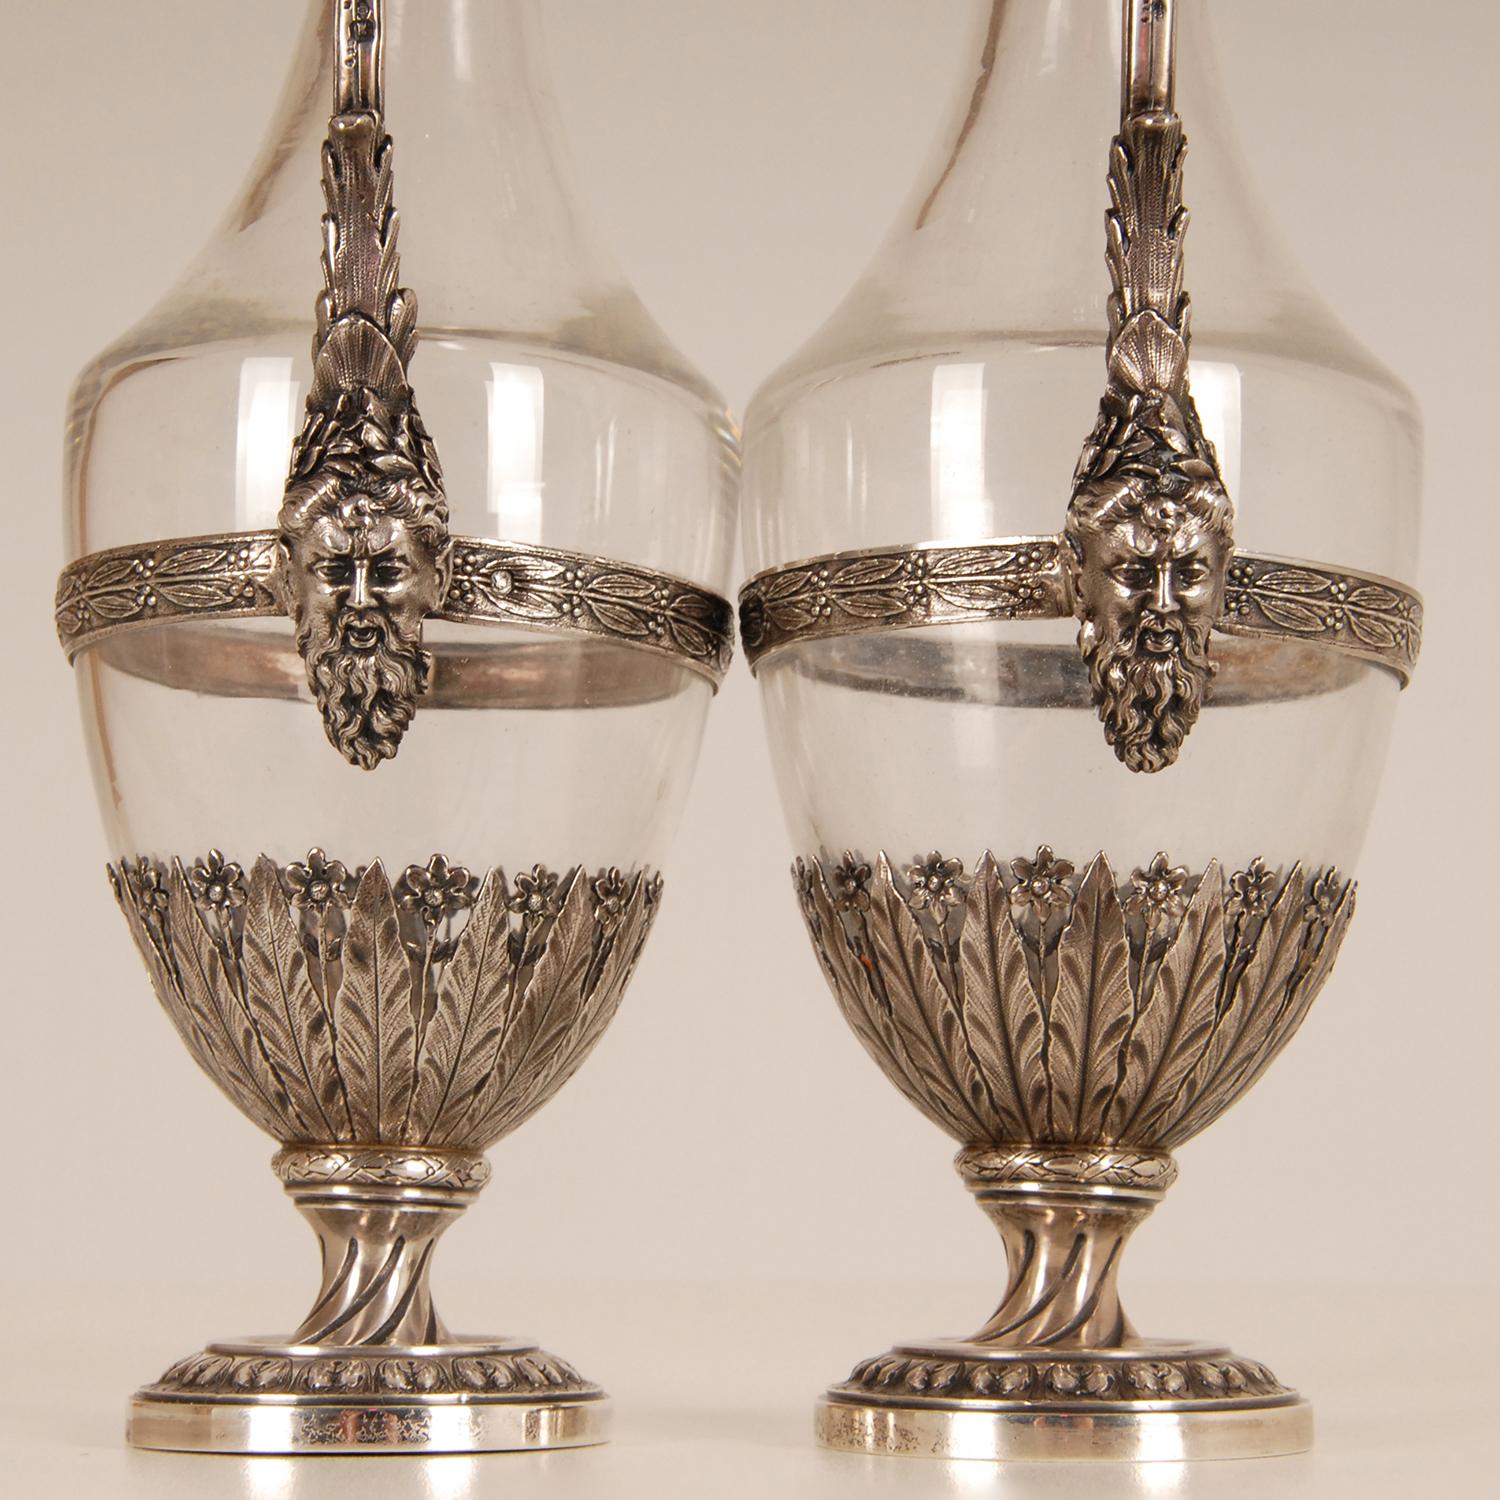 A pair of antique sterling silver and glass decanters 
Style: Louis XVI, Neoclassical, Victorian, French, 19th century, Antique, Georgian
Origin France, Paris, 1880
A pair sterling silver and glass decanters. Fully handcrafted decorative tableware